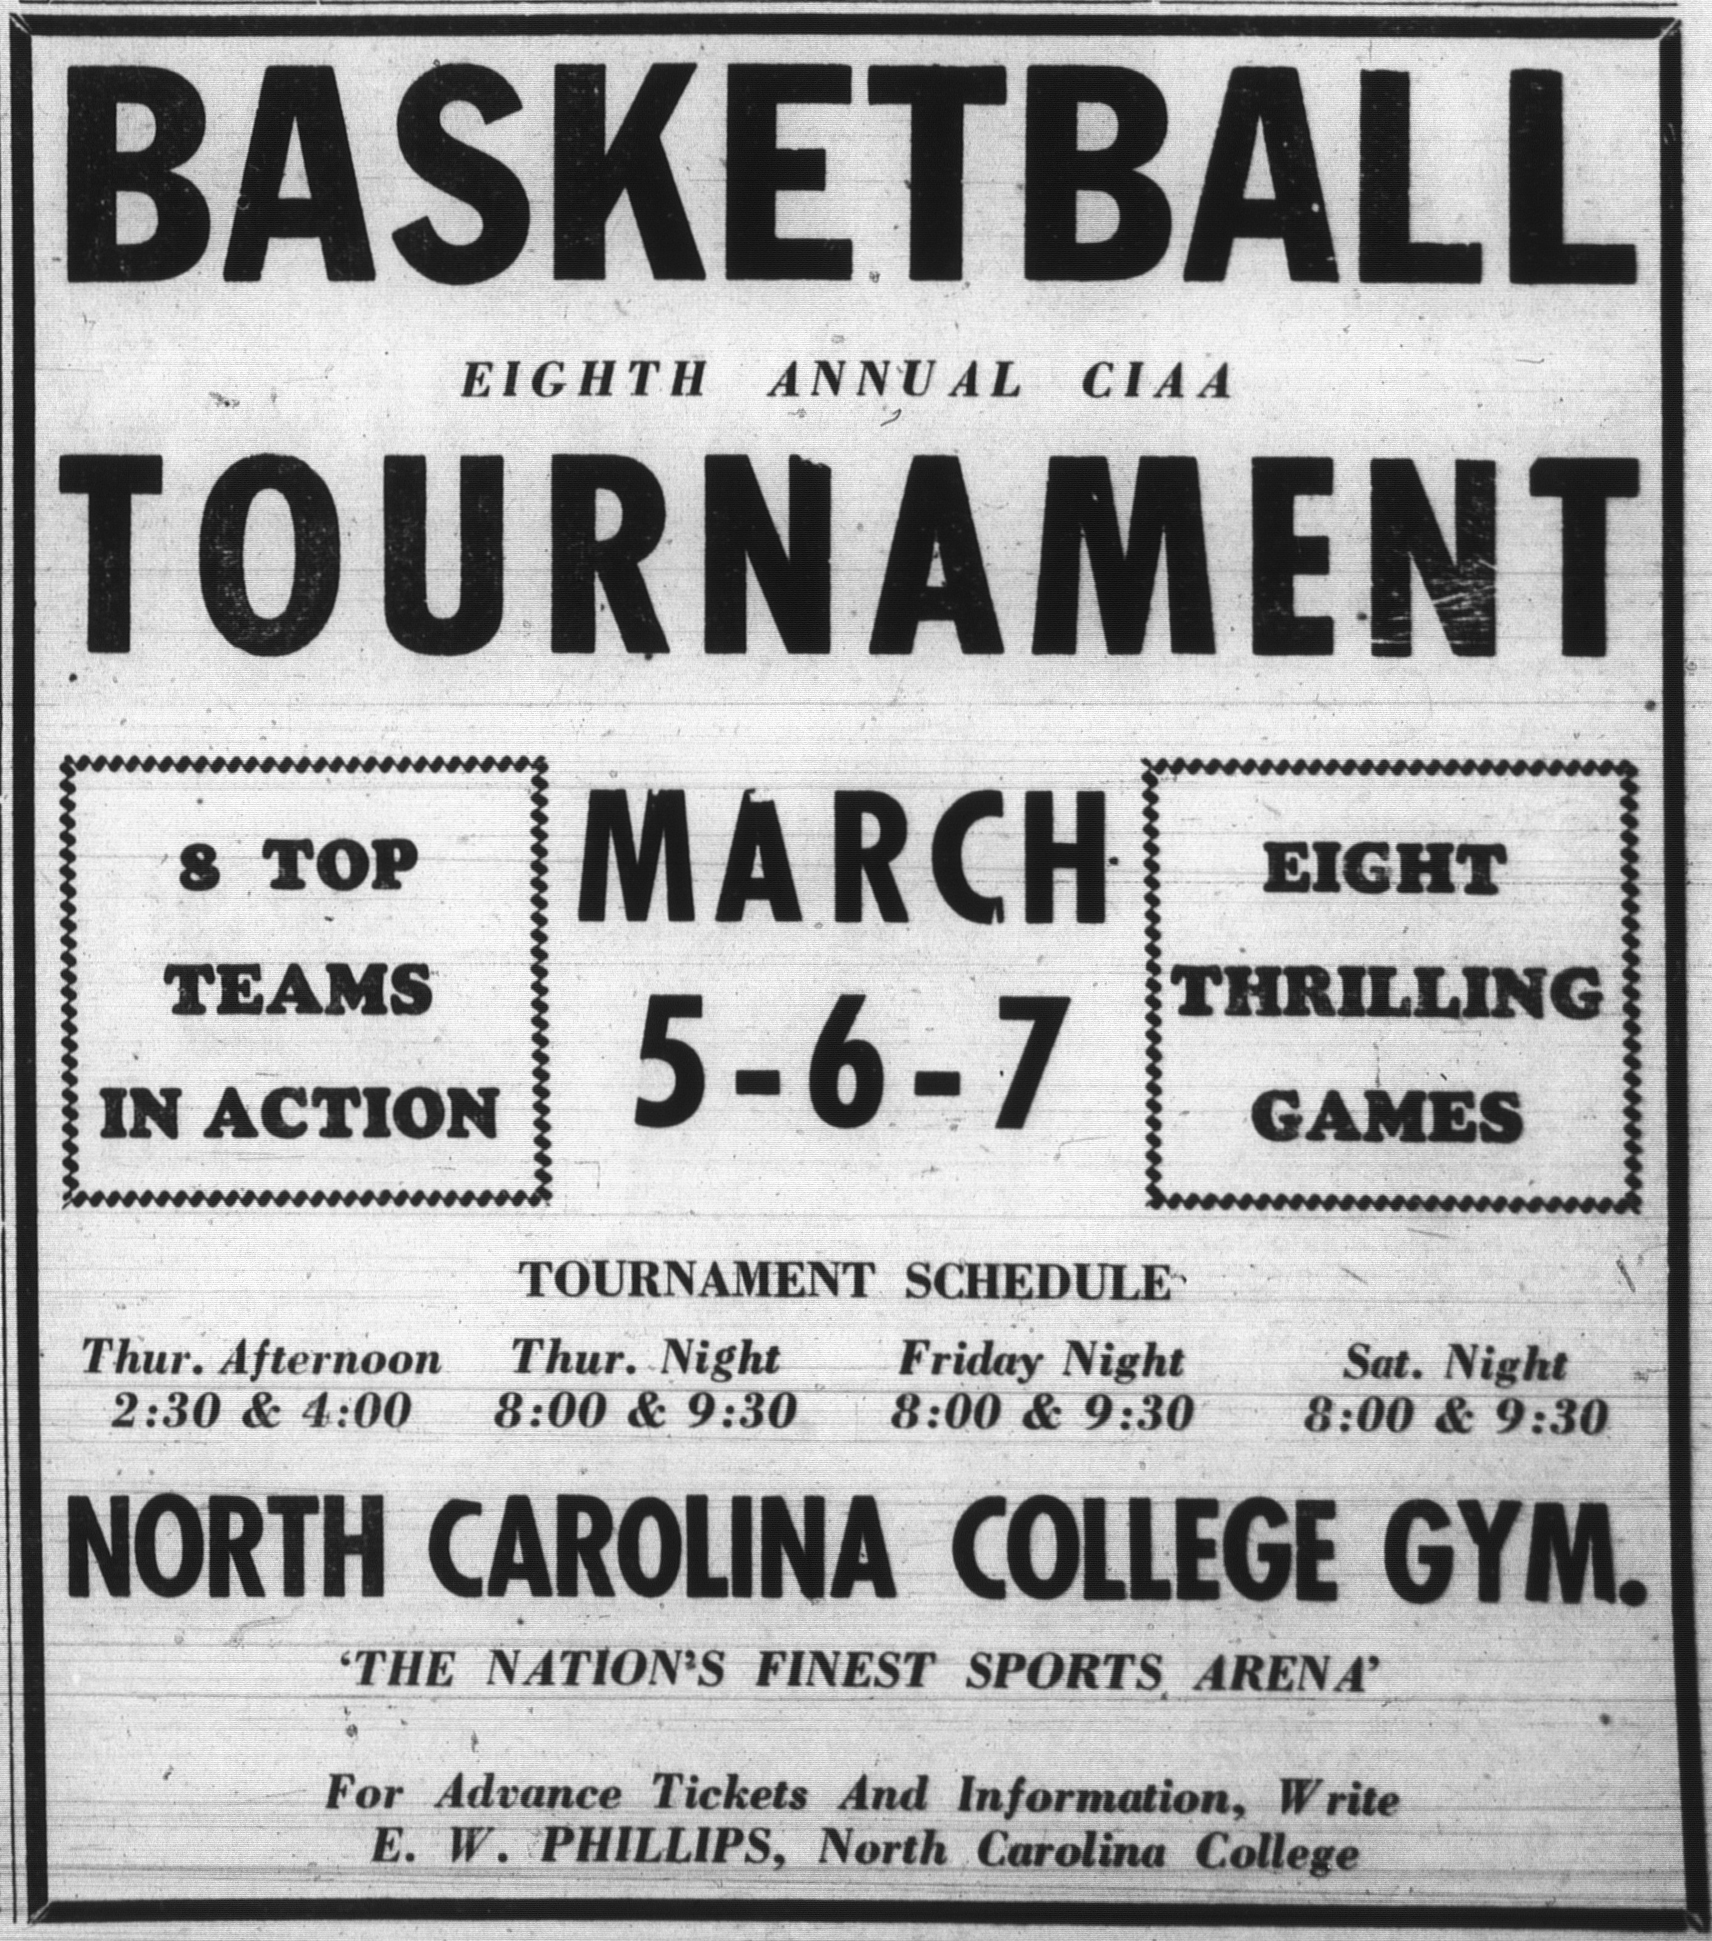 Advertisement for the 1953 CIAA tournament